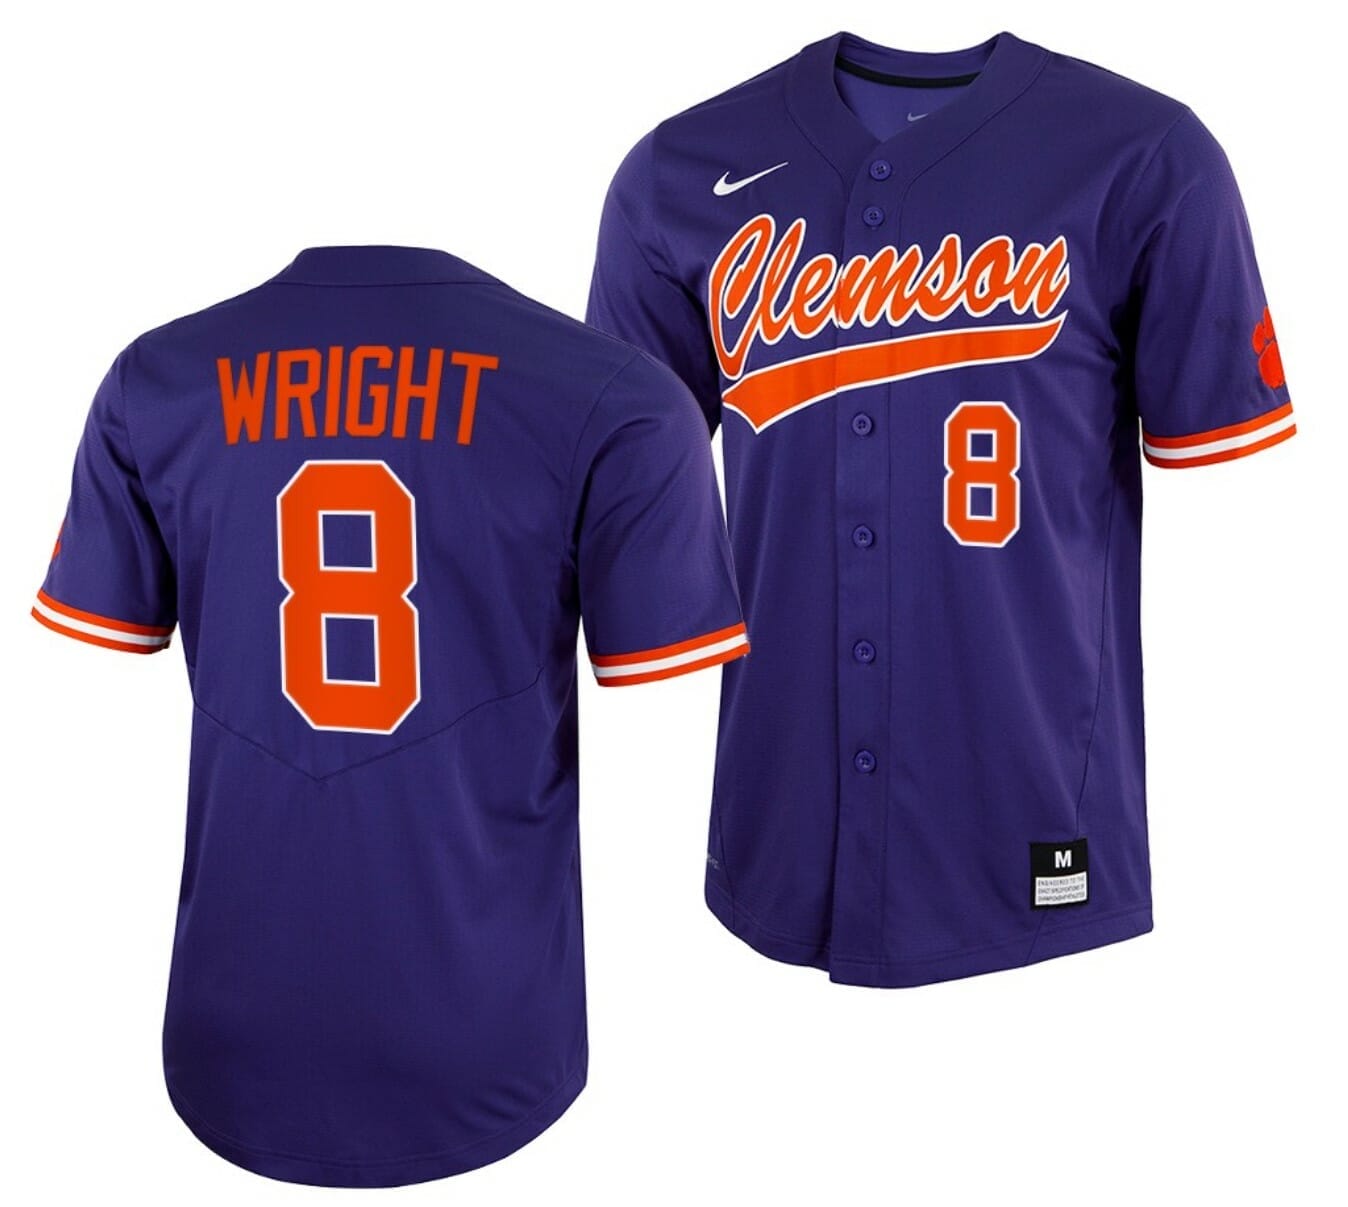 Clemson Tigers Jersey Custom Baseball Name and Number NCAA College White